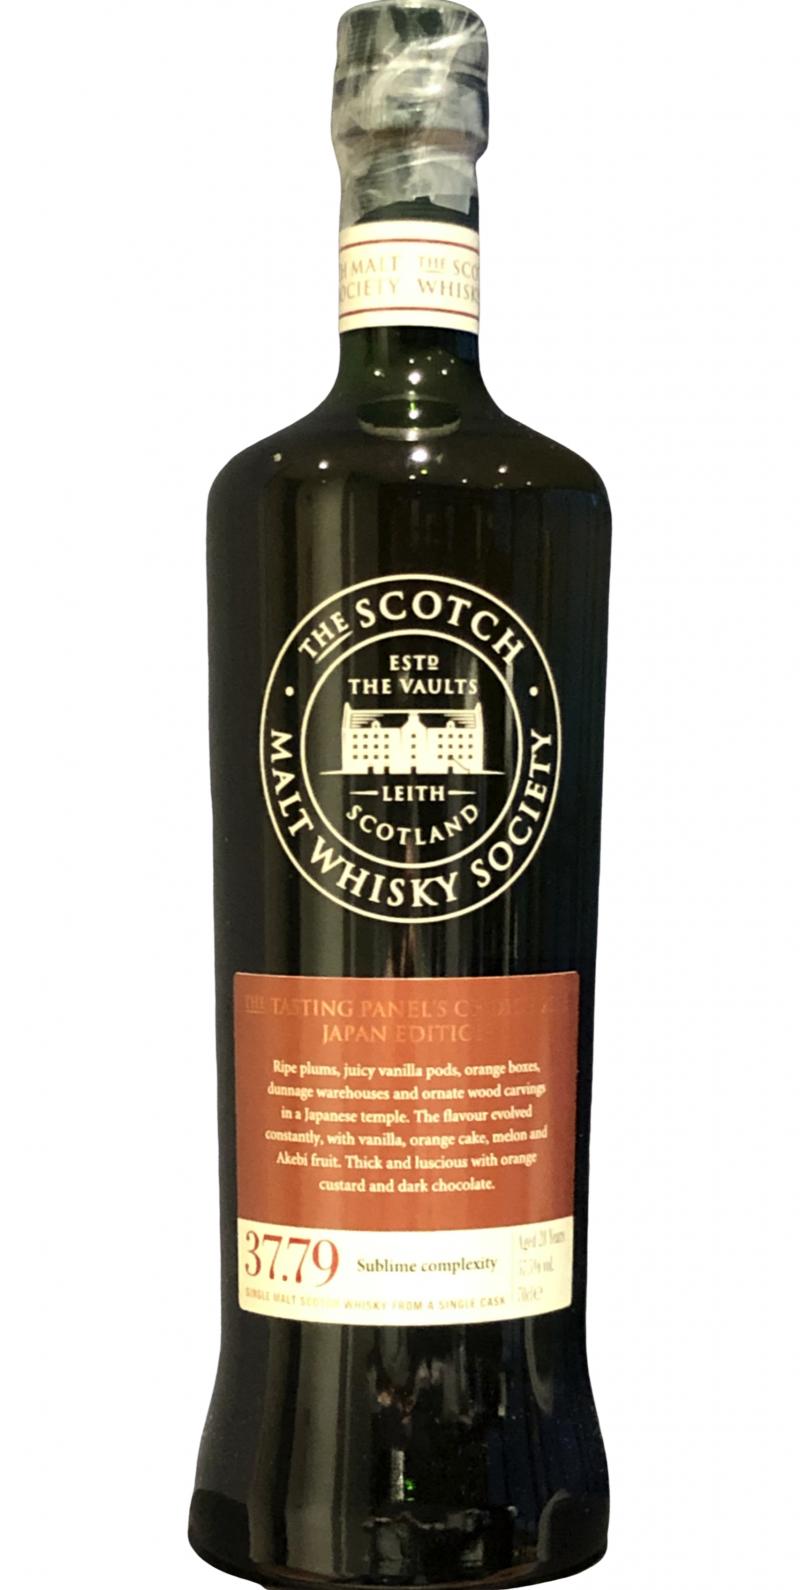 Cragganmore 1987 SMWS 37.79 Sublime complexity Refill Ex-Bourbon Hogshead 57.5% 700ml